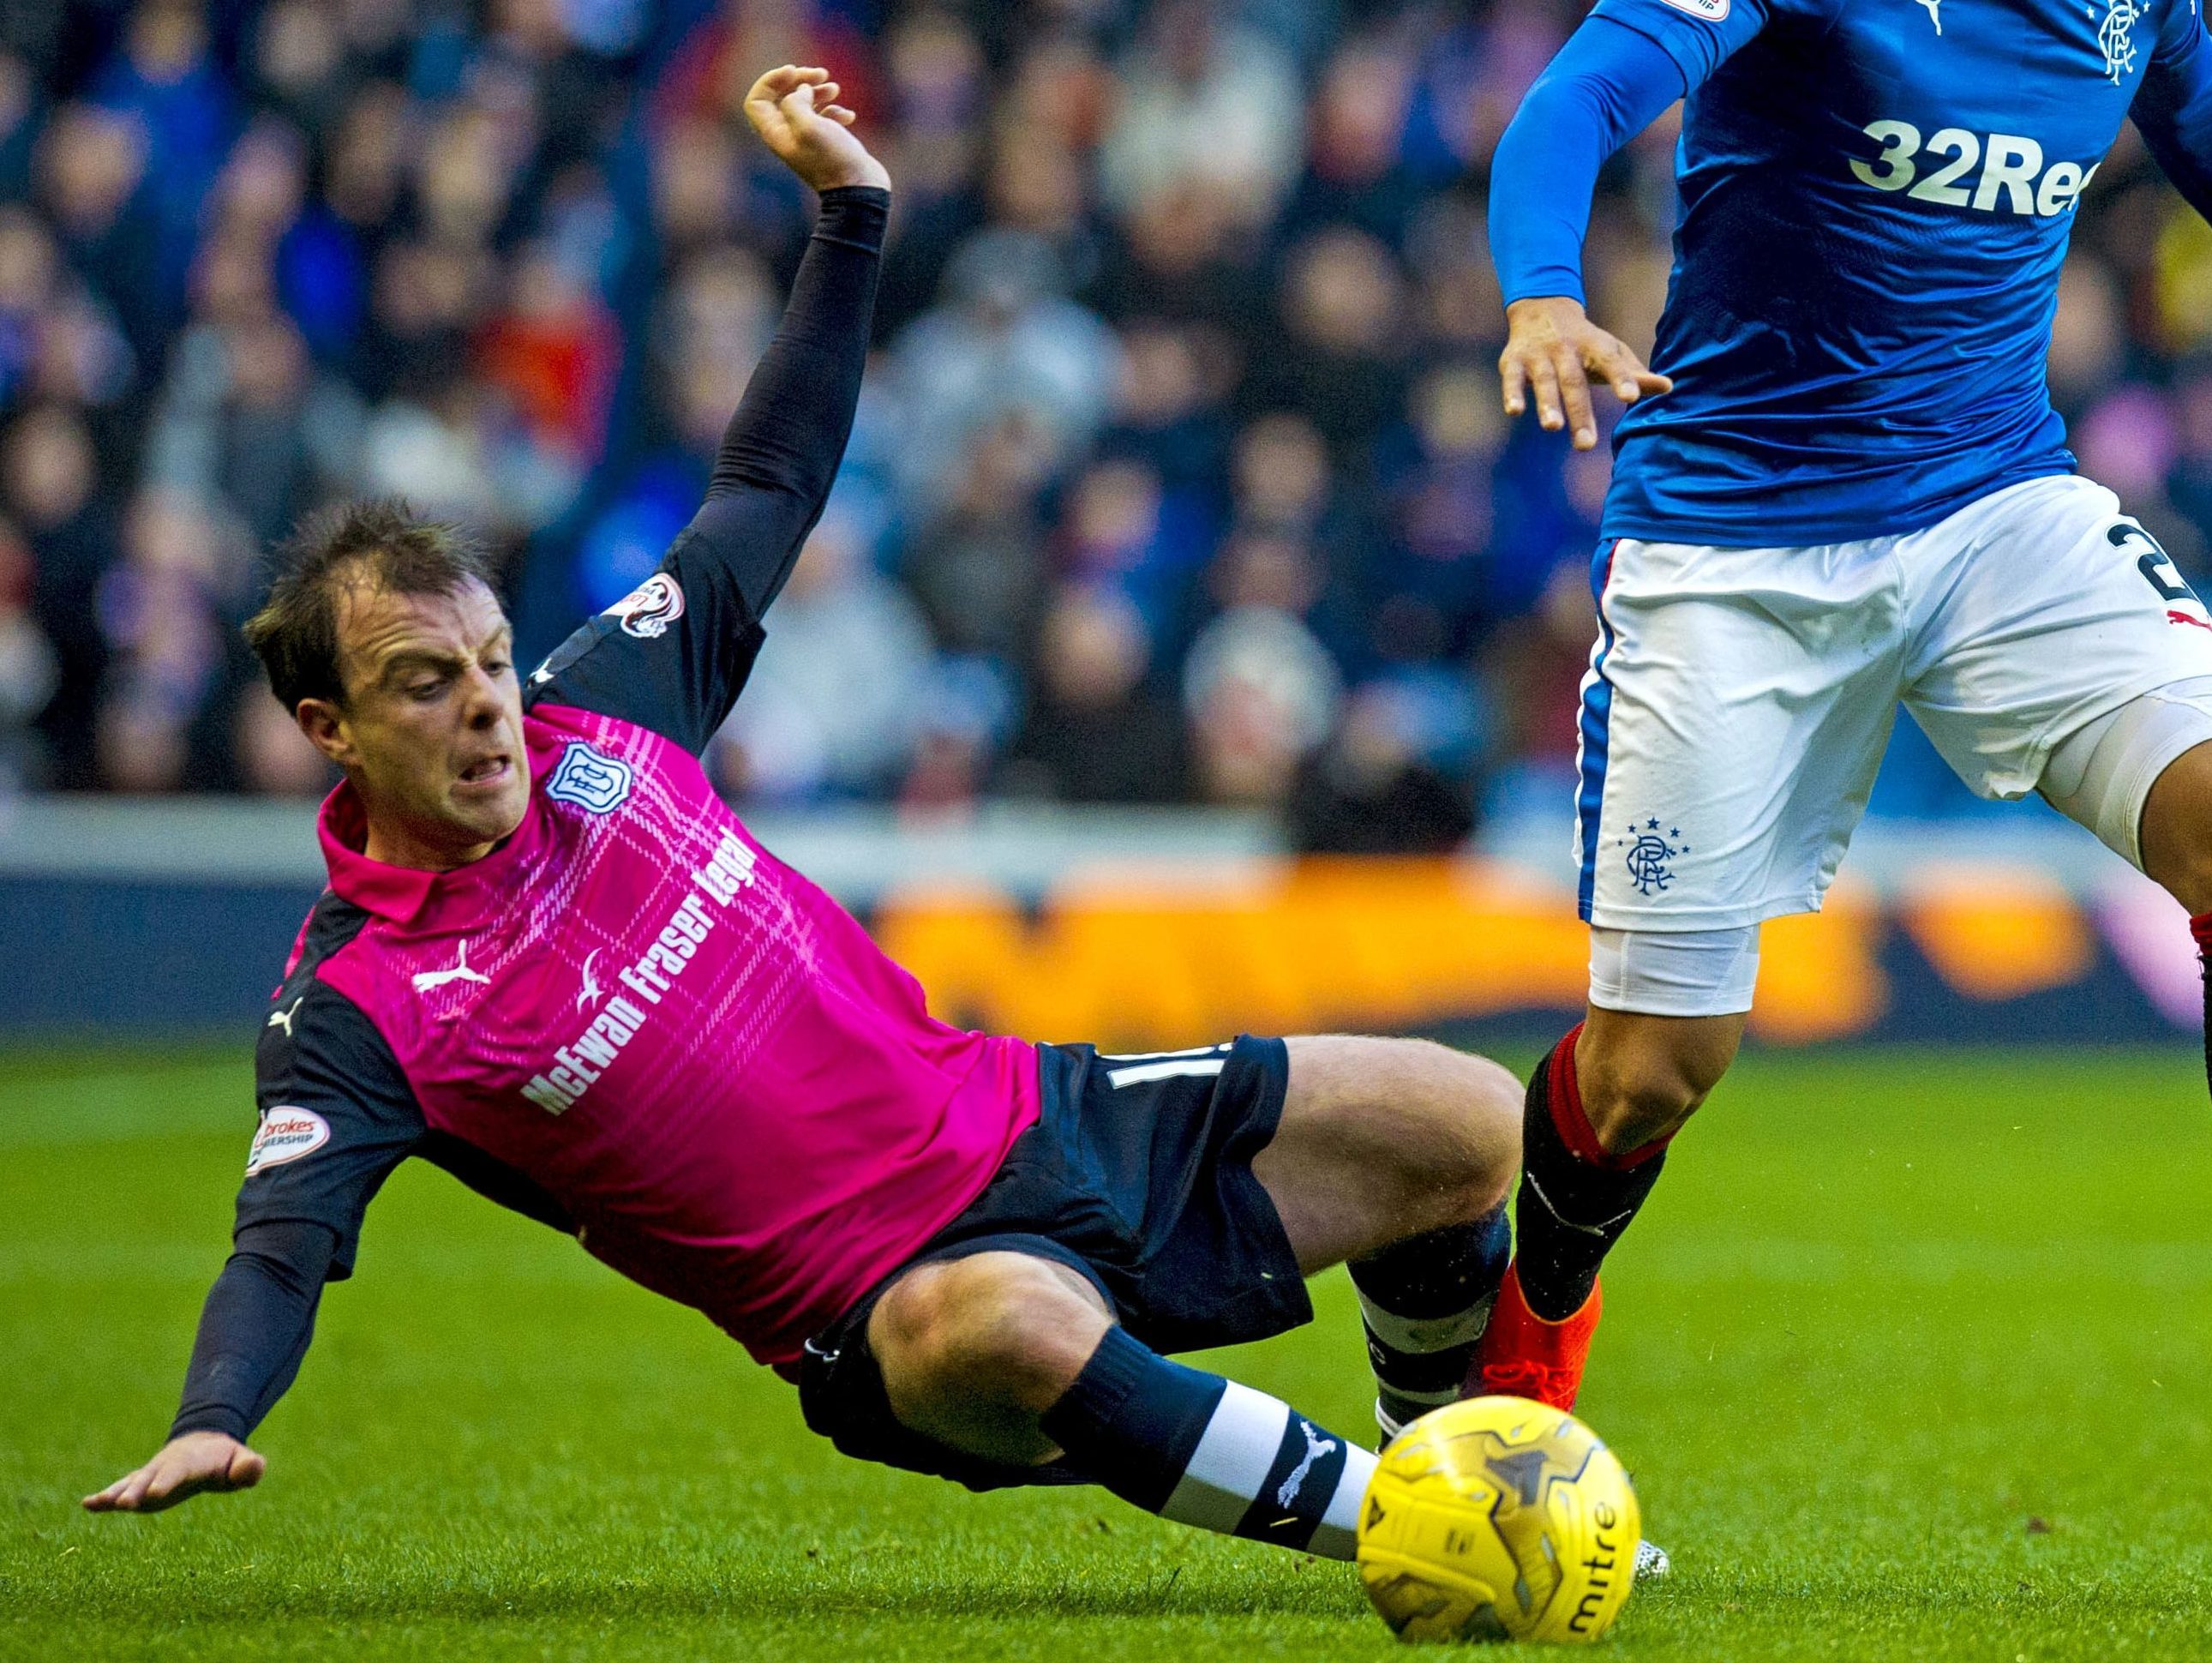 Paul McGowan in action at Ibrox.